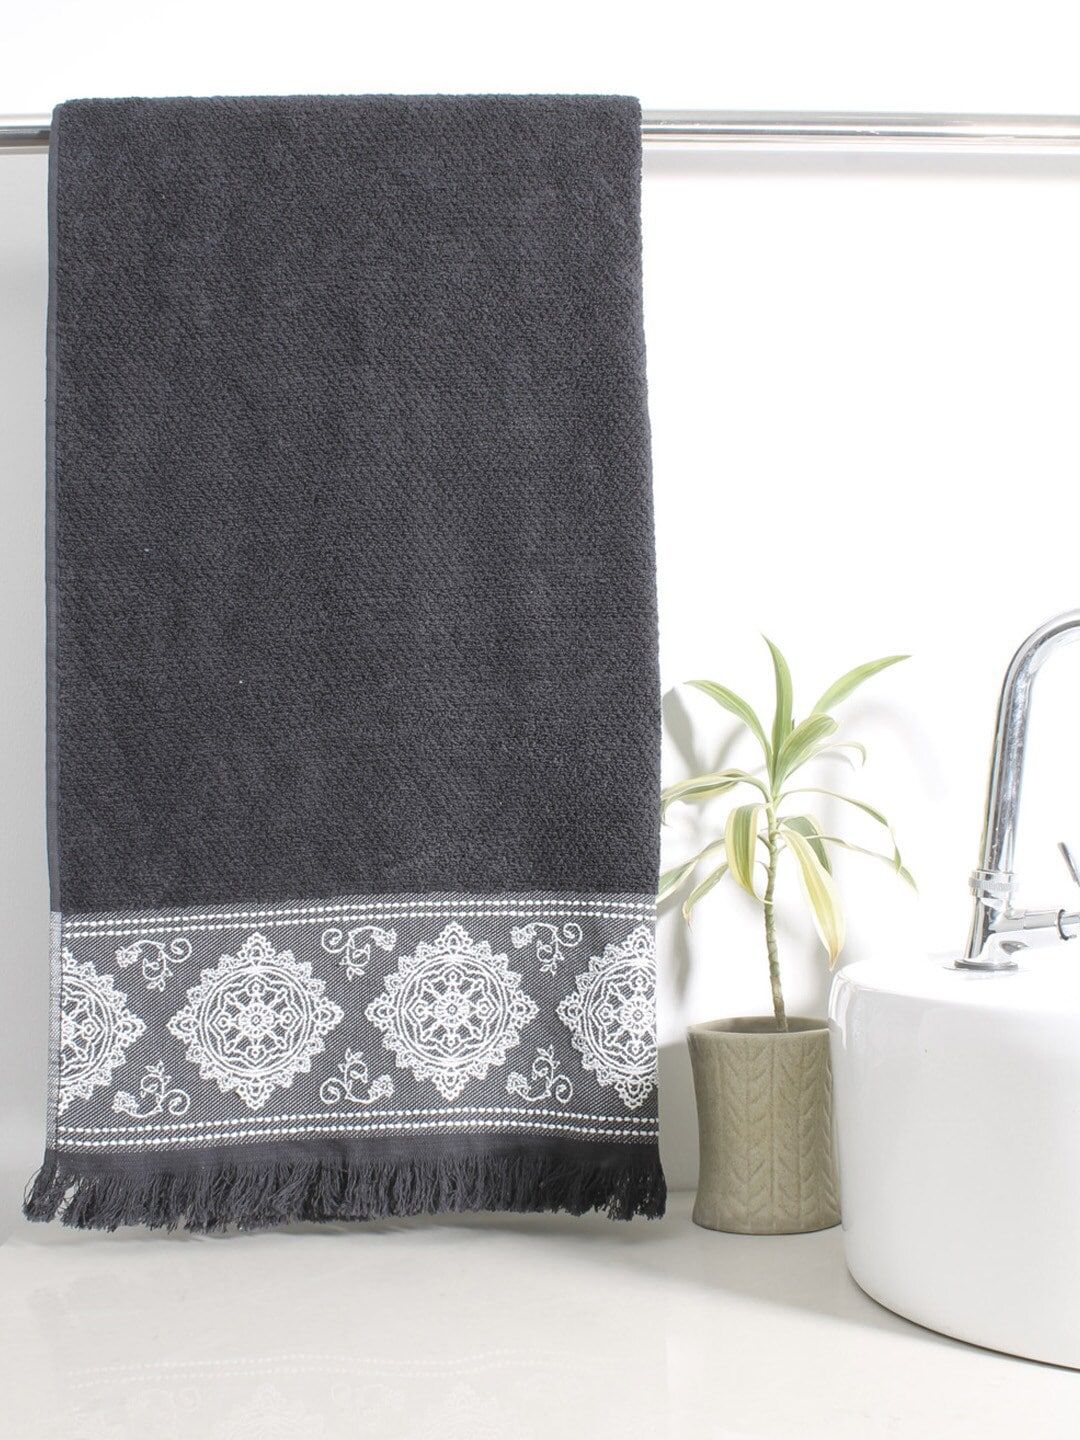 AVI Living Black Embroidered 550 GSM Bath Towel Price in India